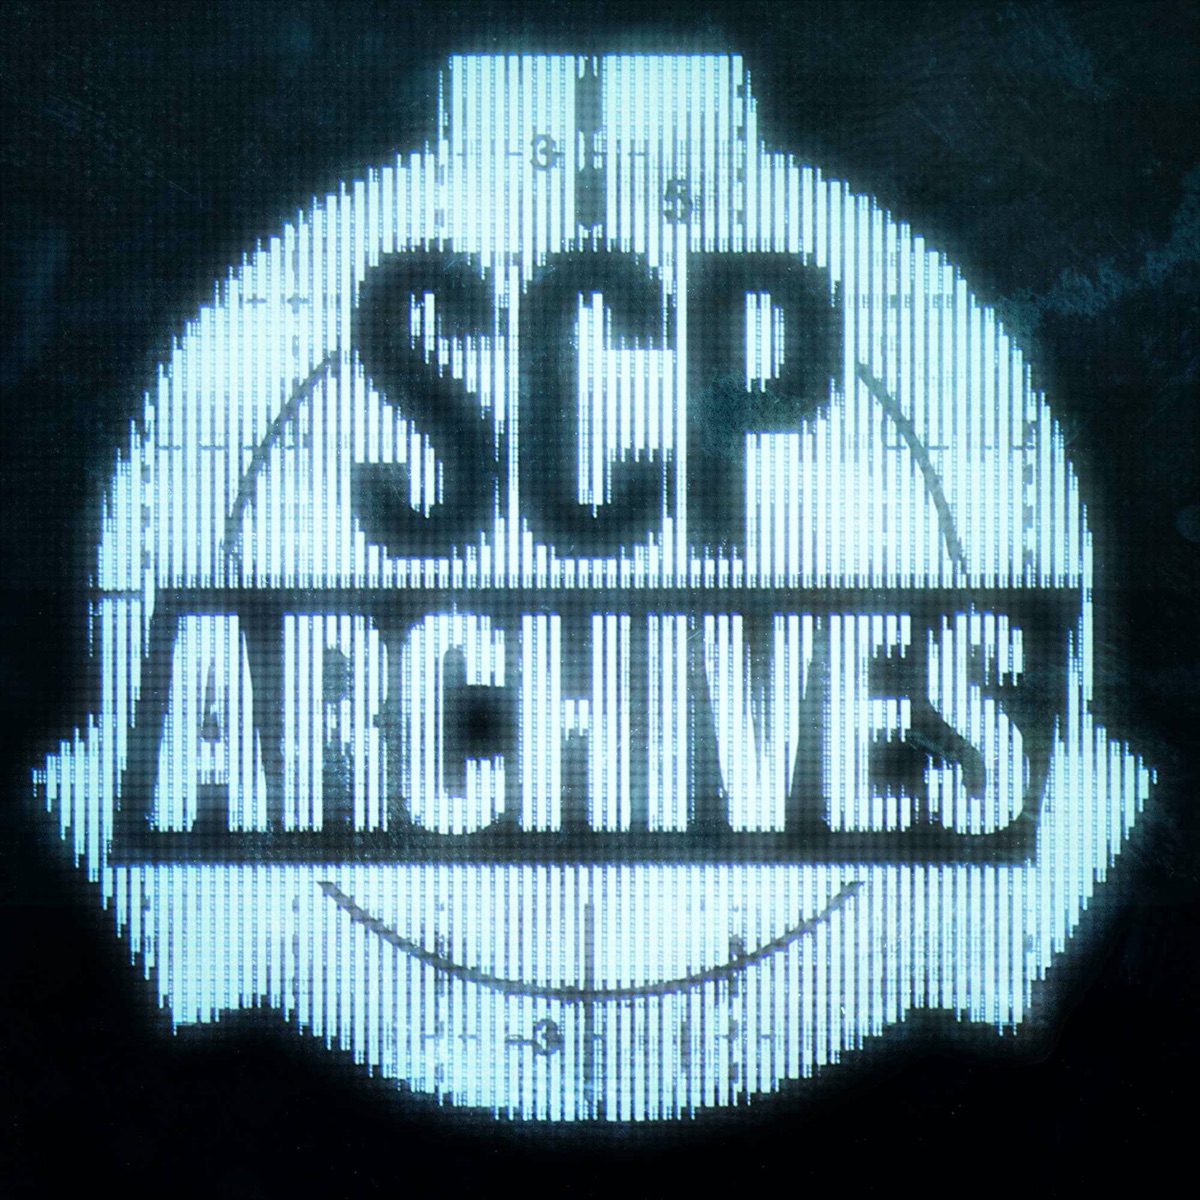 SCP-682: Hard-to-Destroy Reptile – SCP Archives – Podcast – Podtail